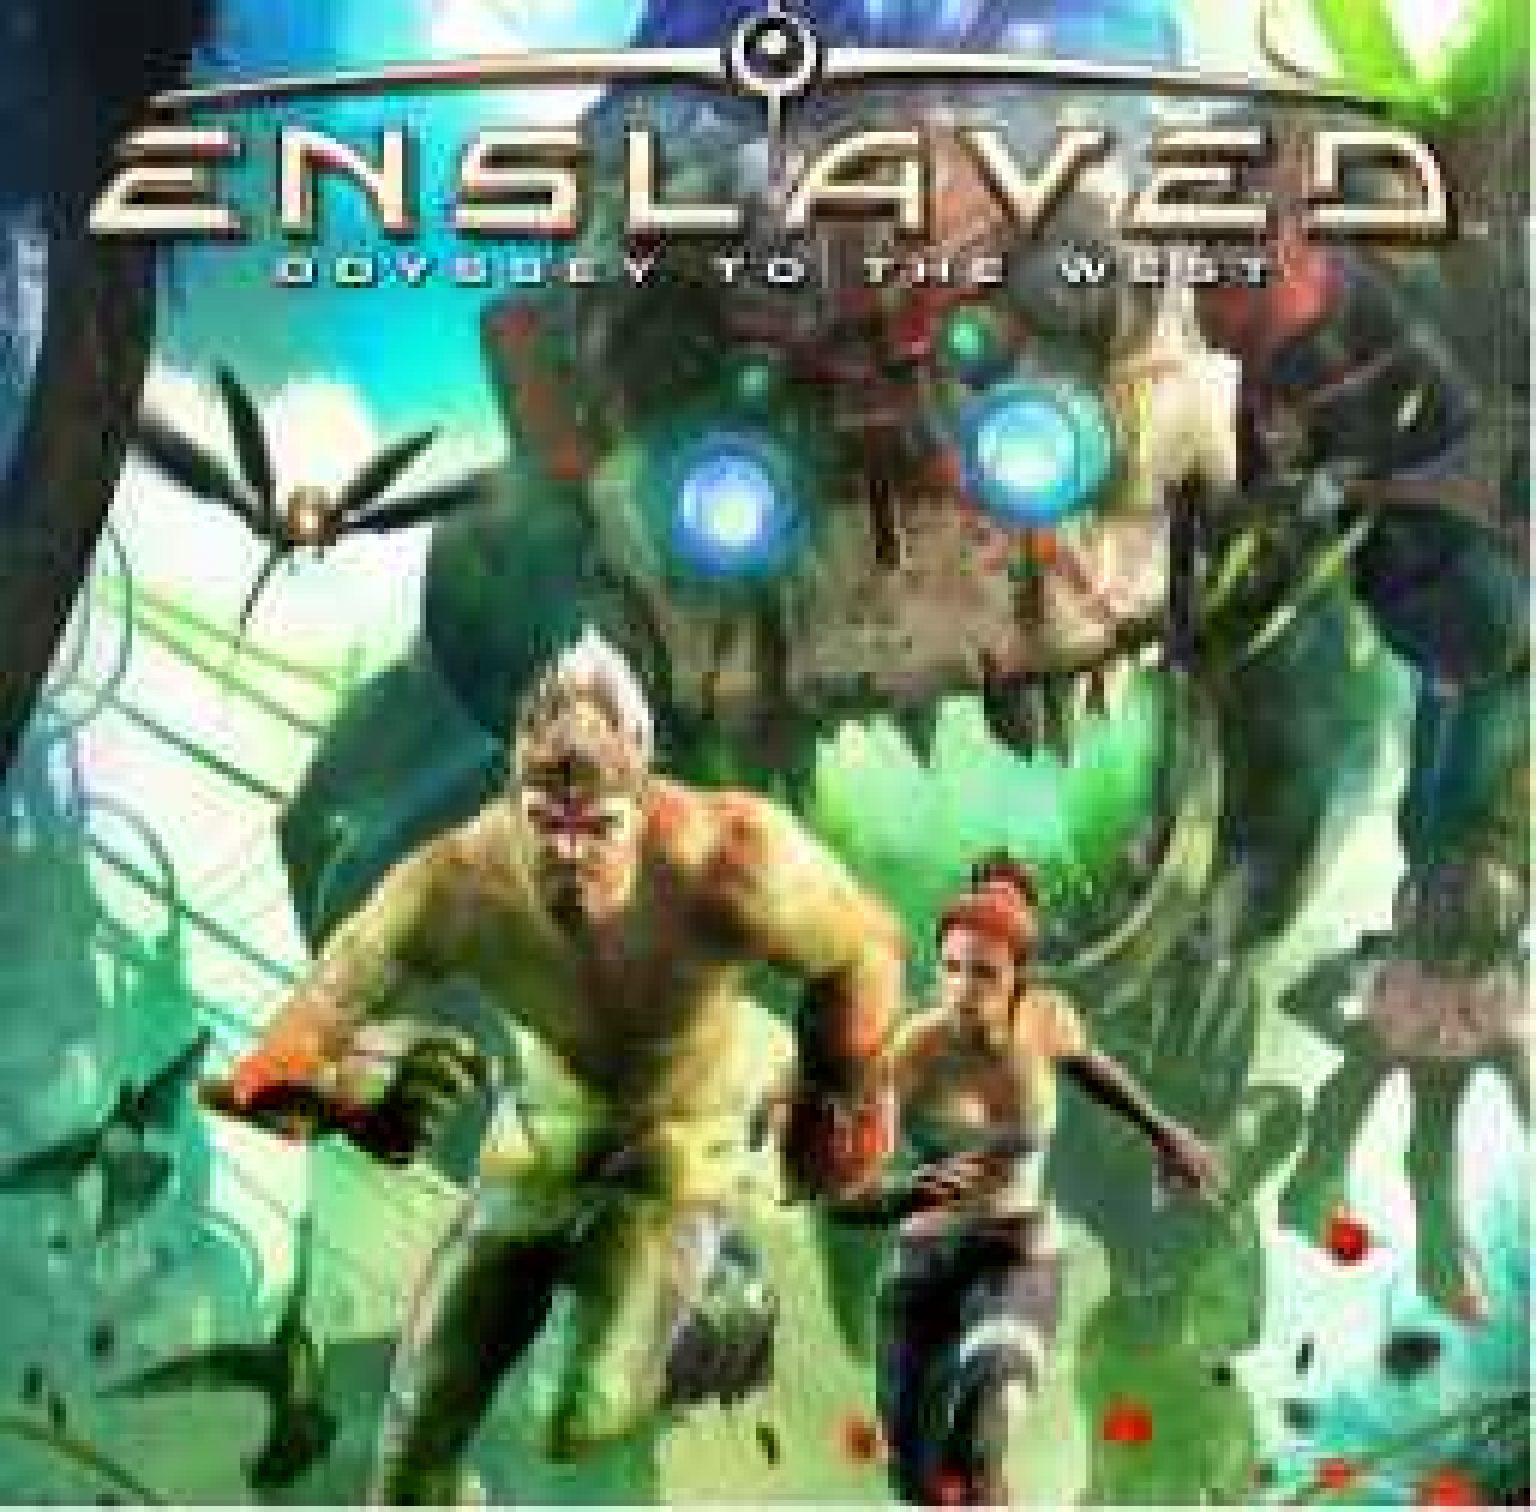 download free enslaved ™ odyssey to the west